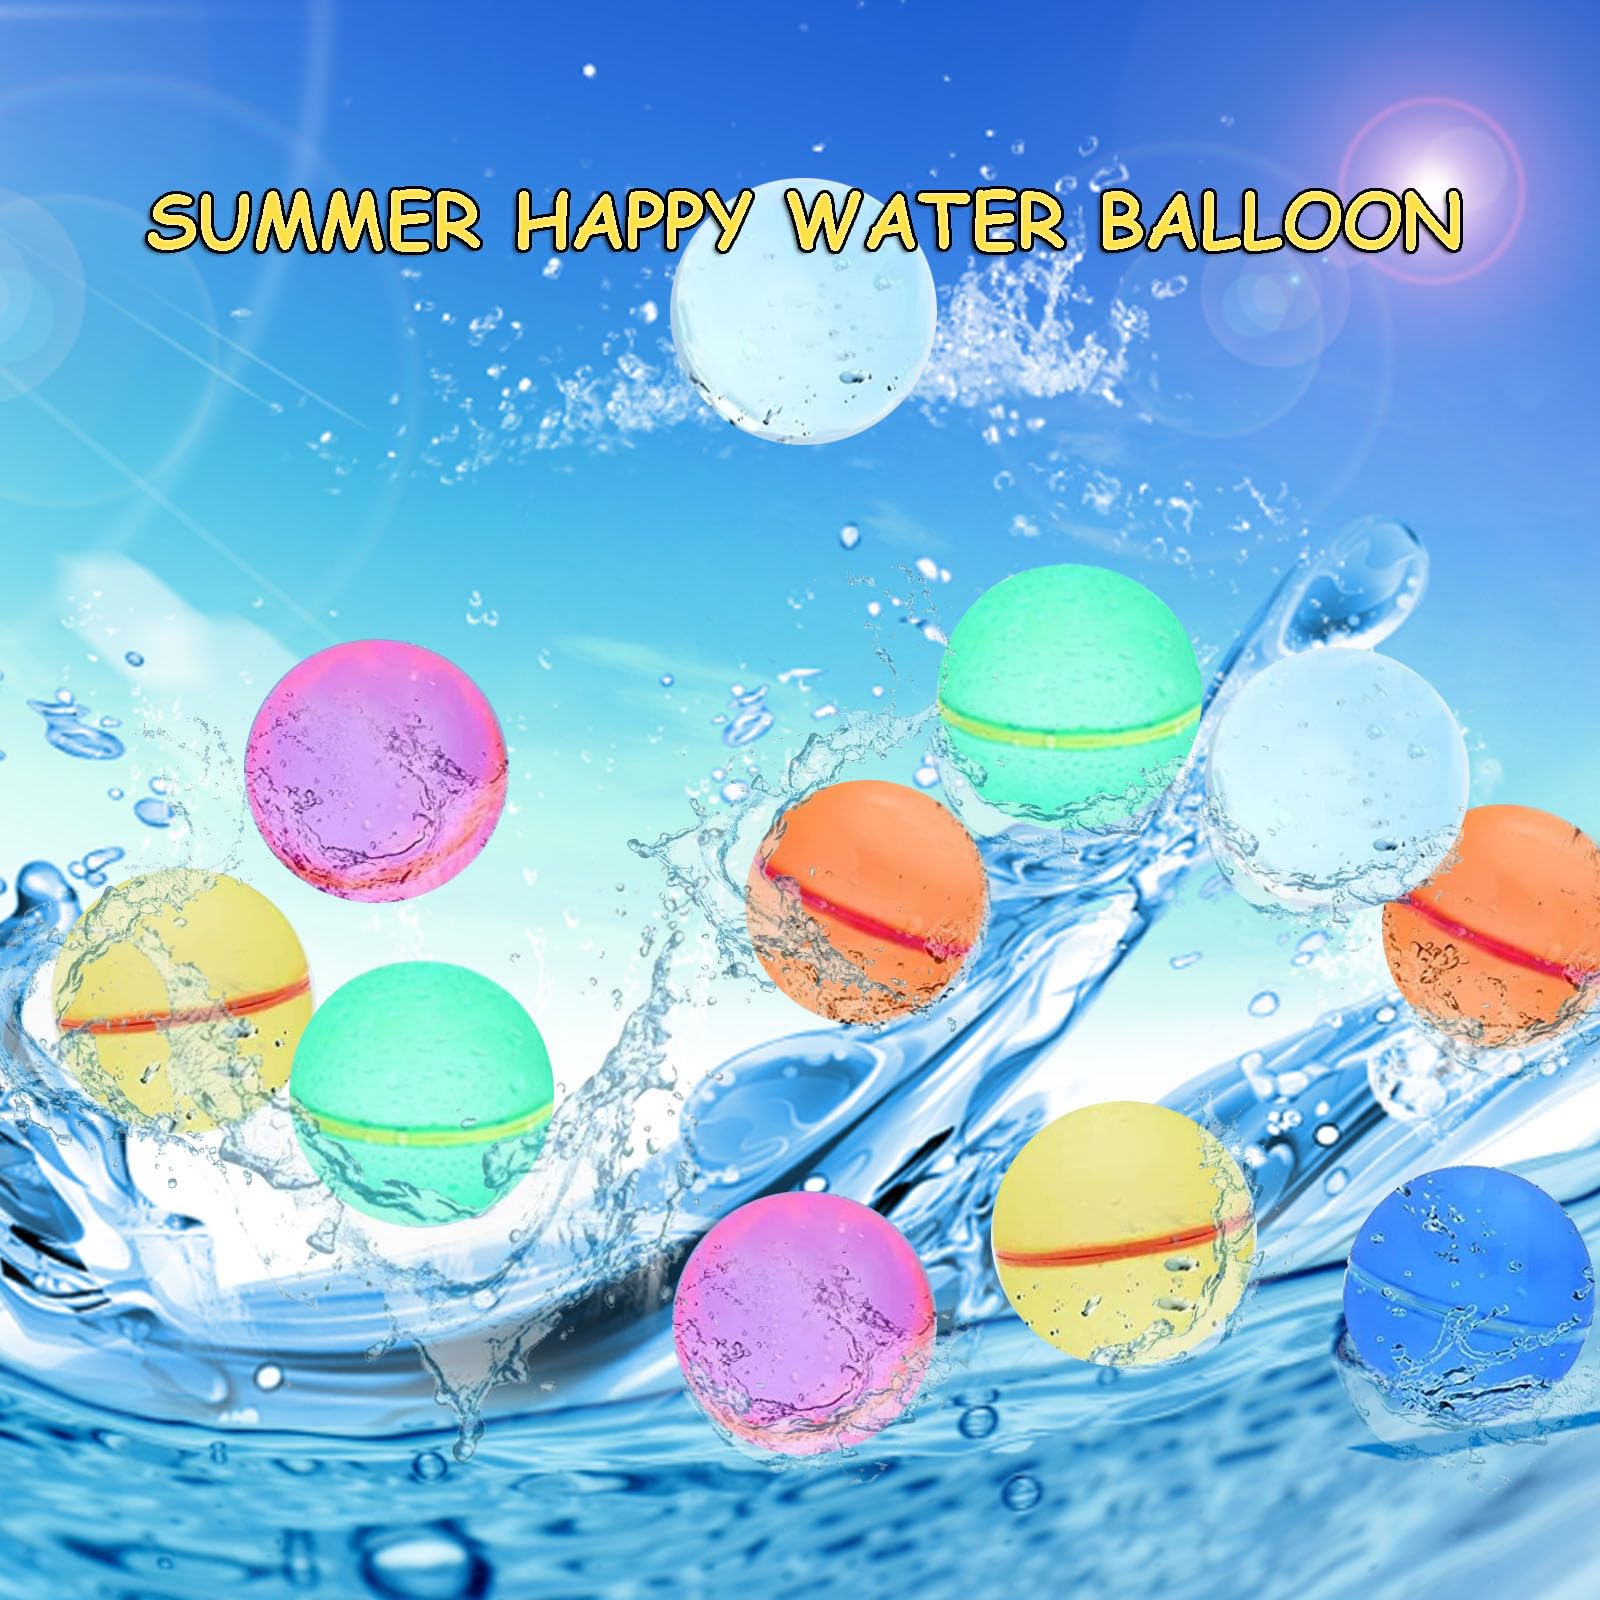 MSTOKIN 12 Pack Reusable Water Balloons for Kids, Quick Fill Water Balloon Toys for Outdoor Activities, Refillable Self Sealing Magnetic Close Water Balloon Balls for Summer Party Gift